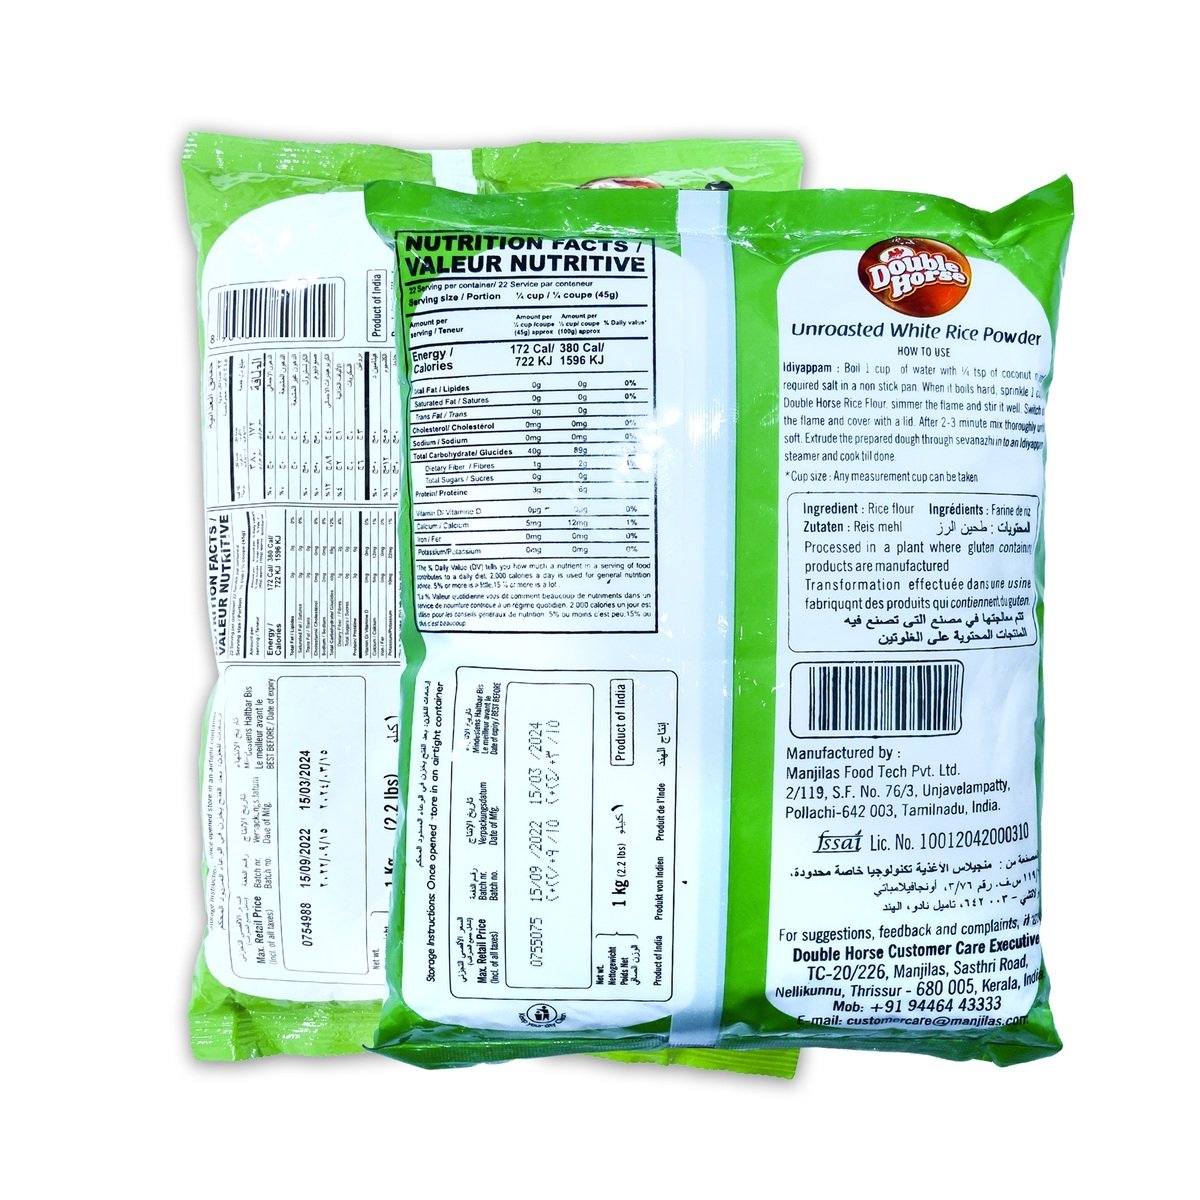 Double Horse Rice Powder Value Pack 2 x 1 kg